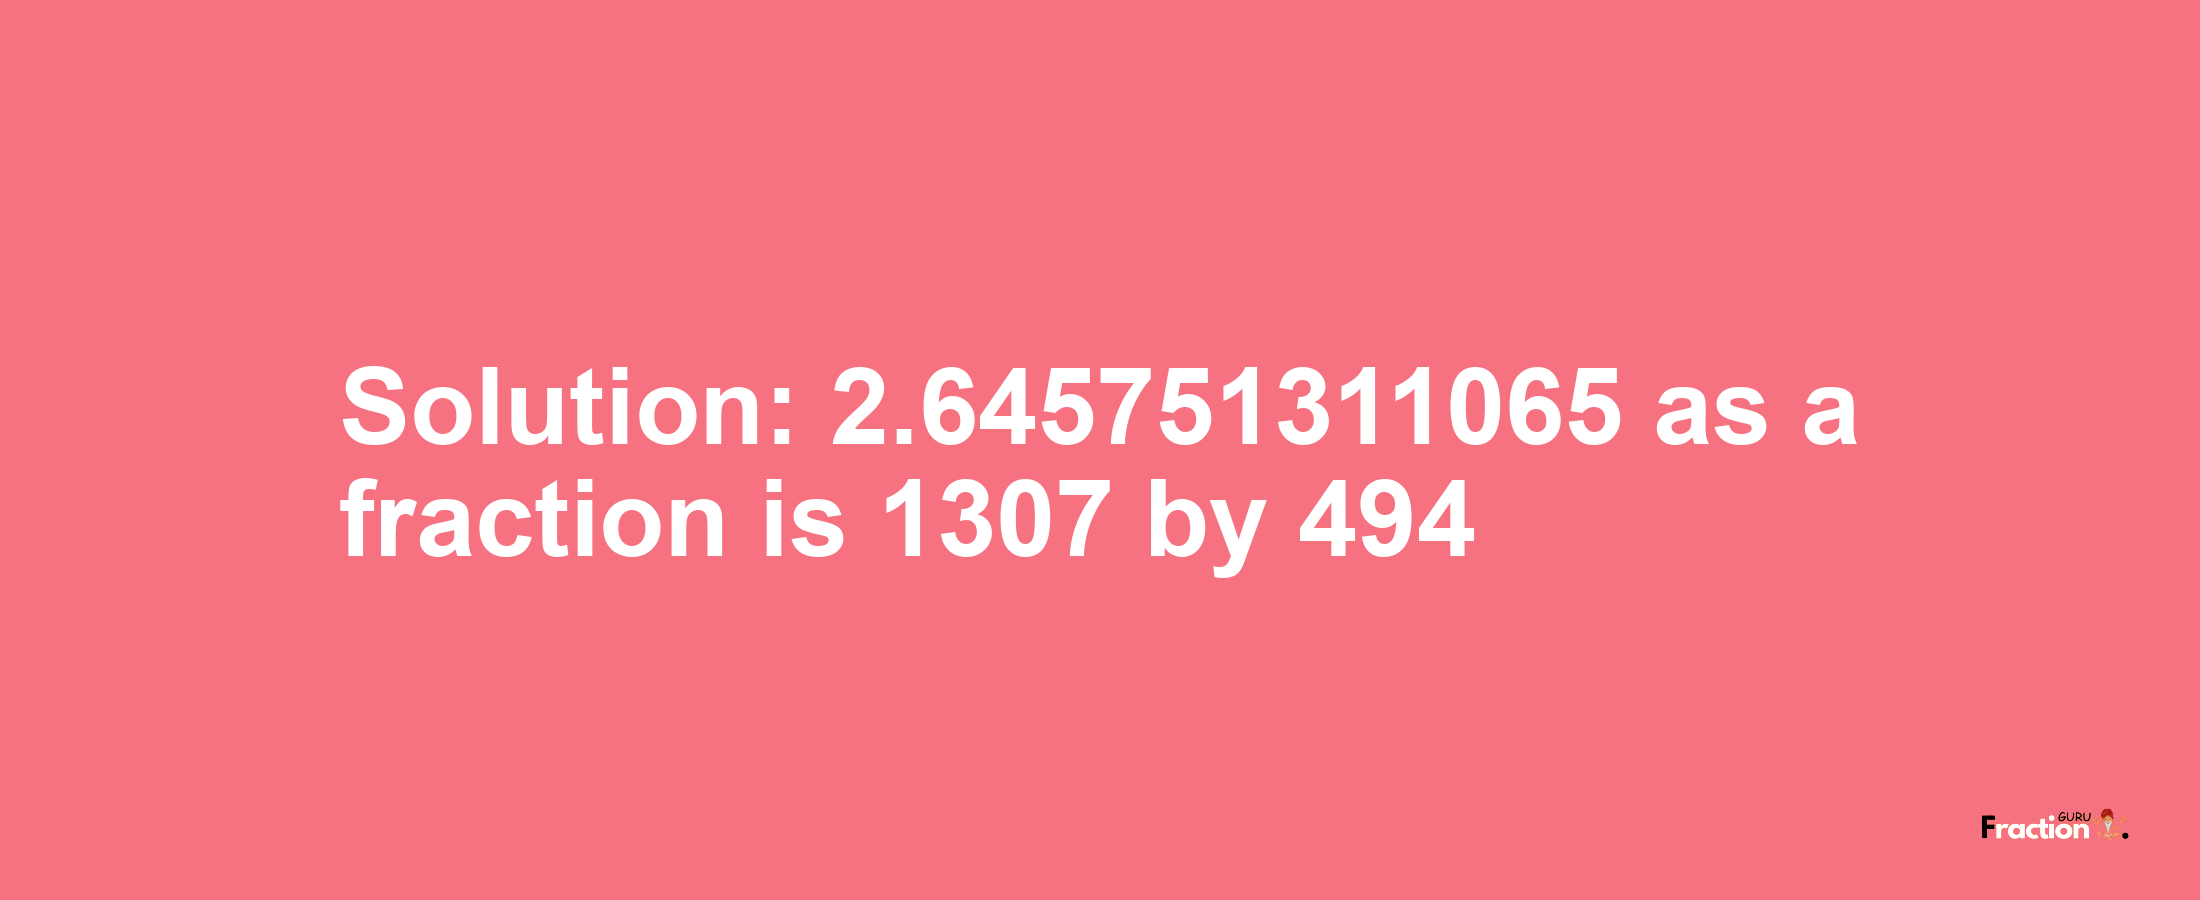 Solution:2.645751311065 as a fraction is 1307/494